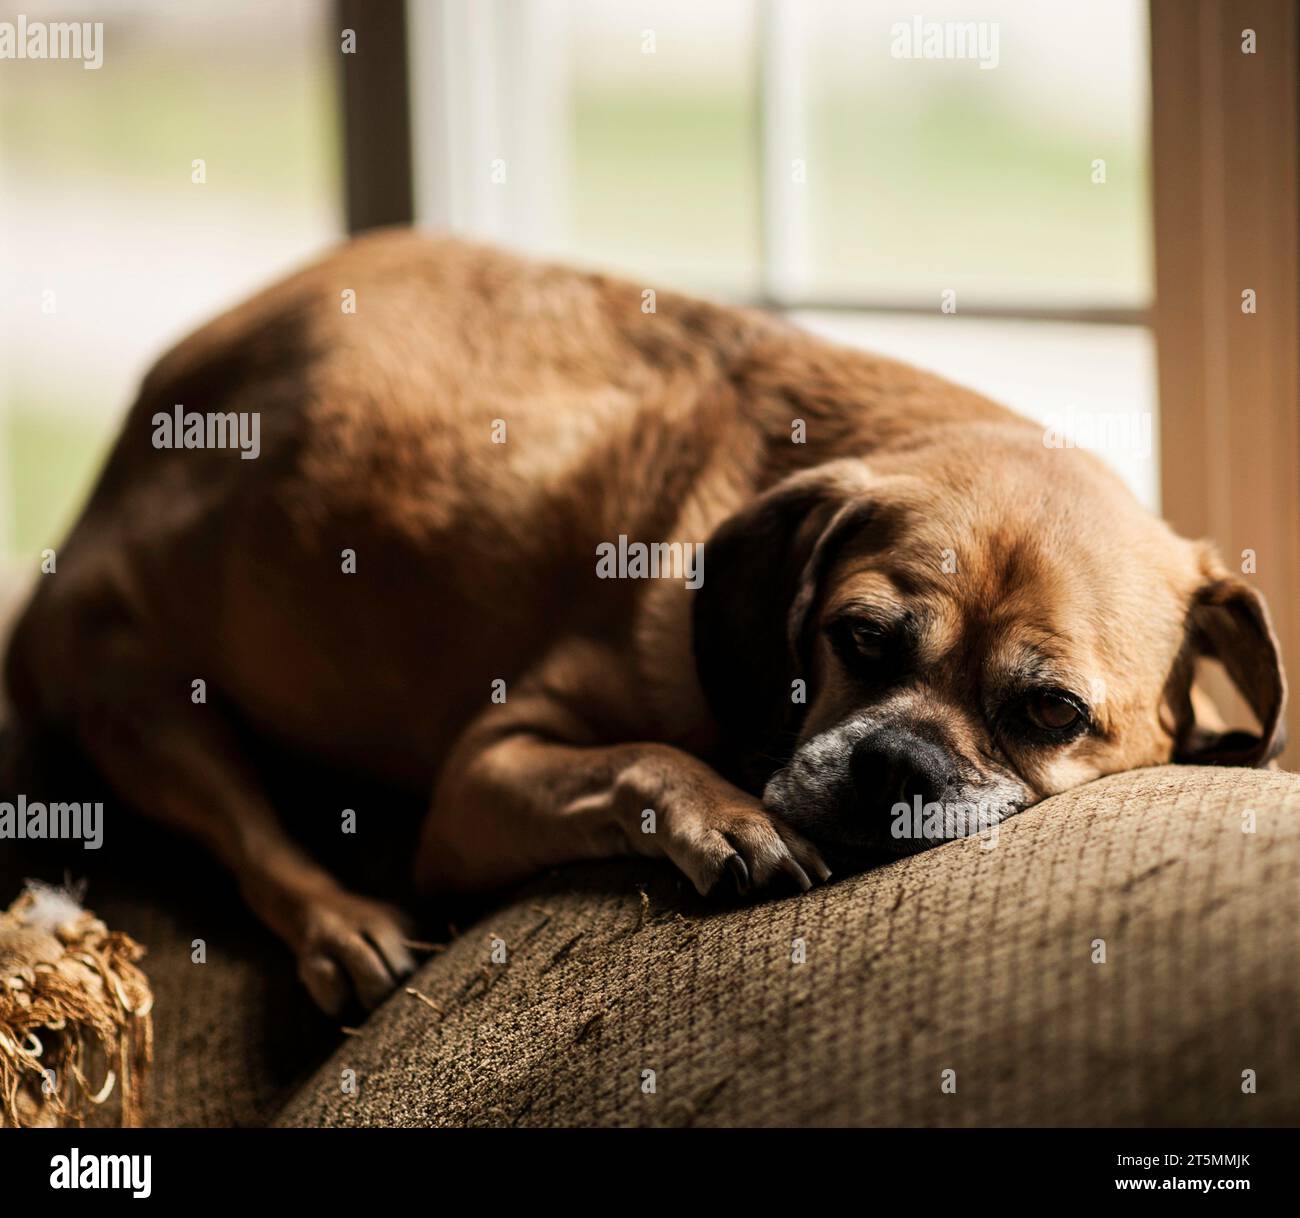 Brown Puggle dog sleeping on couch Stock Photo